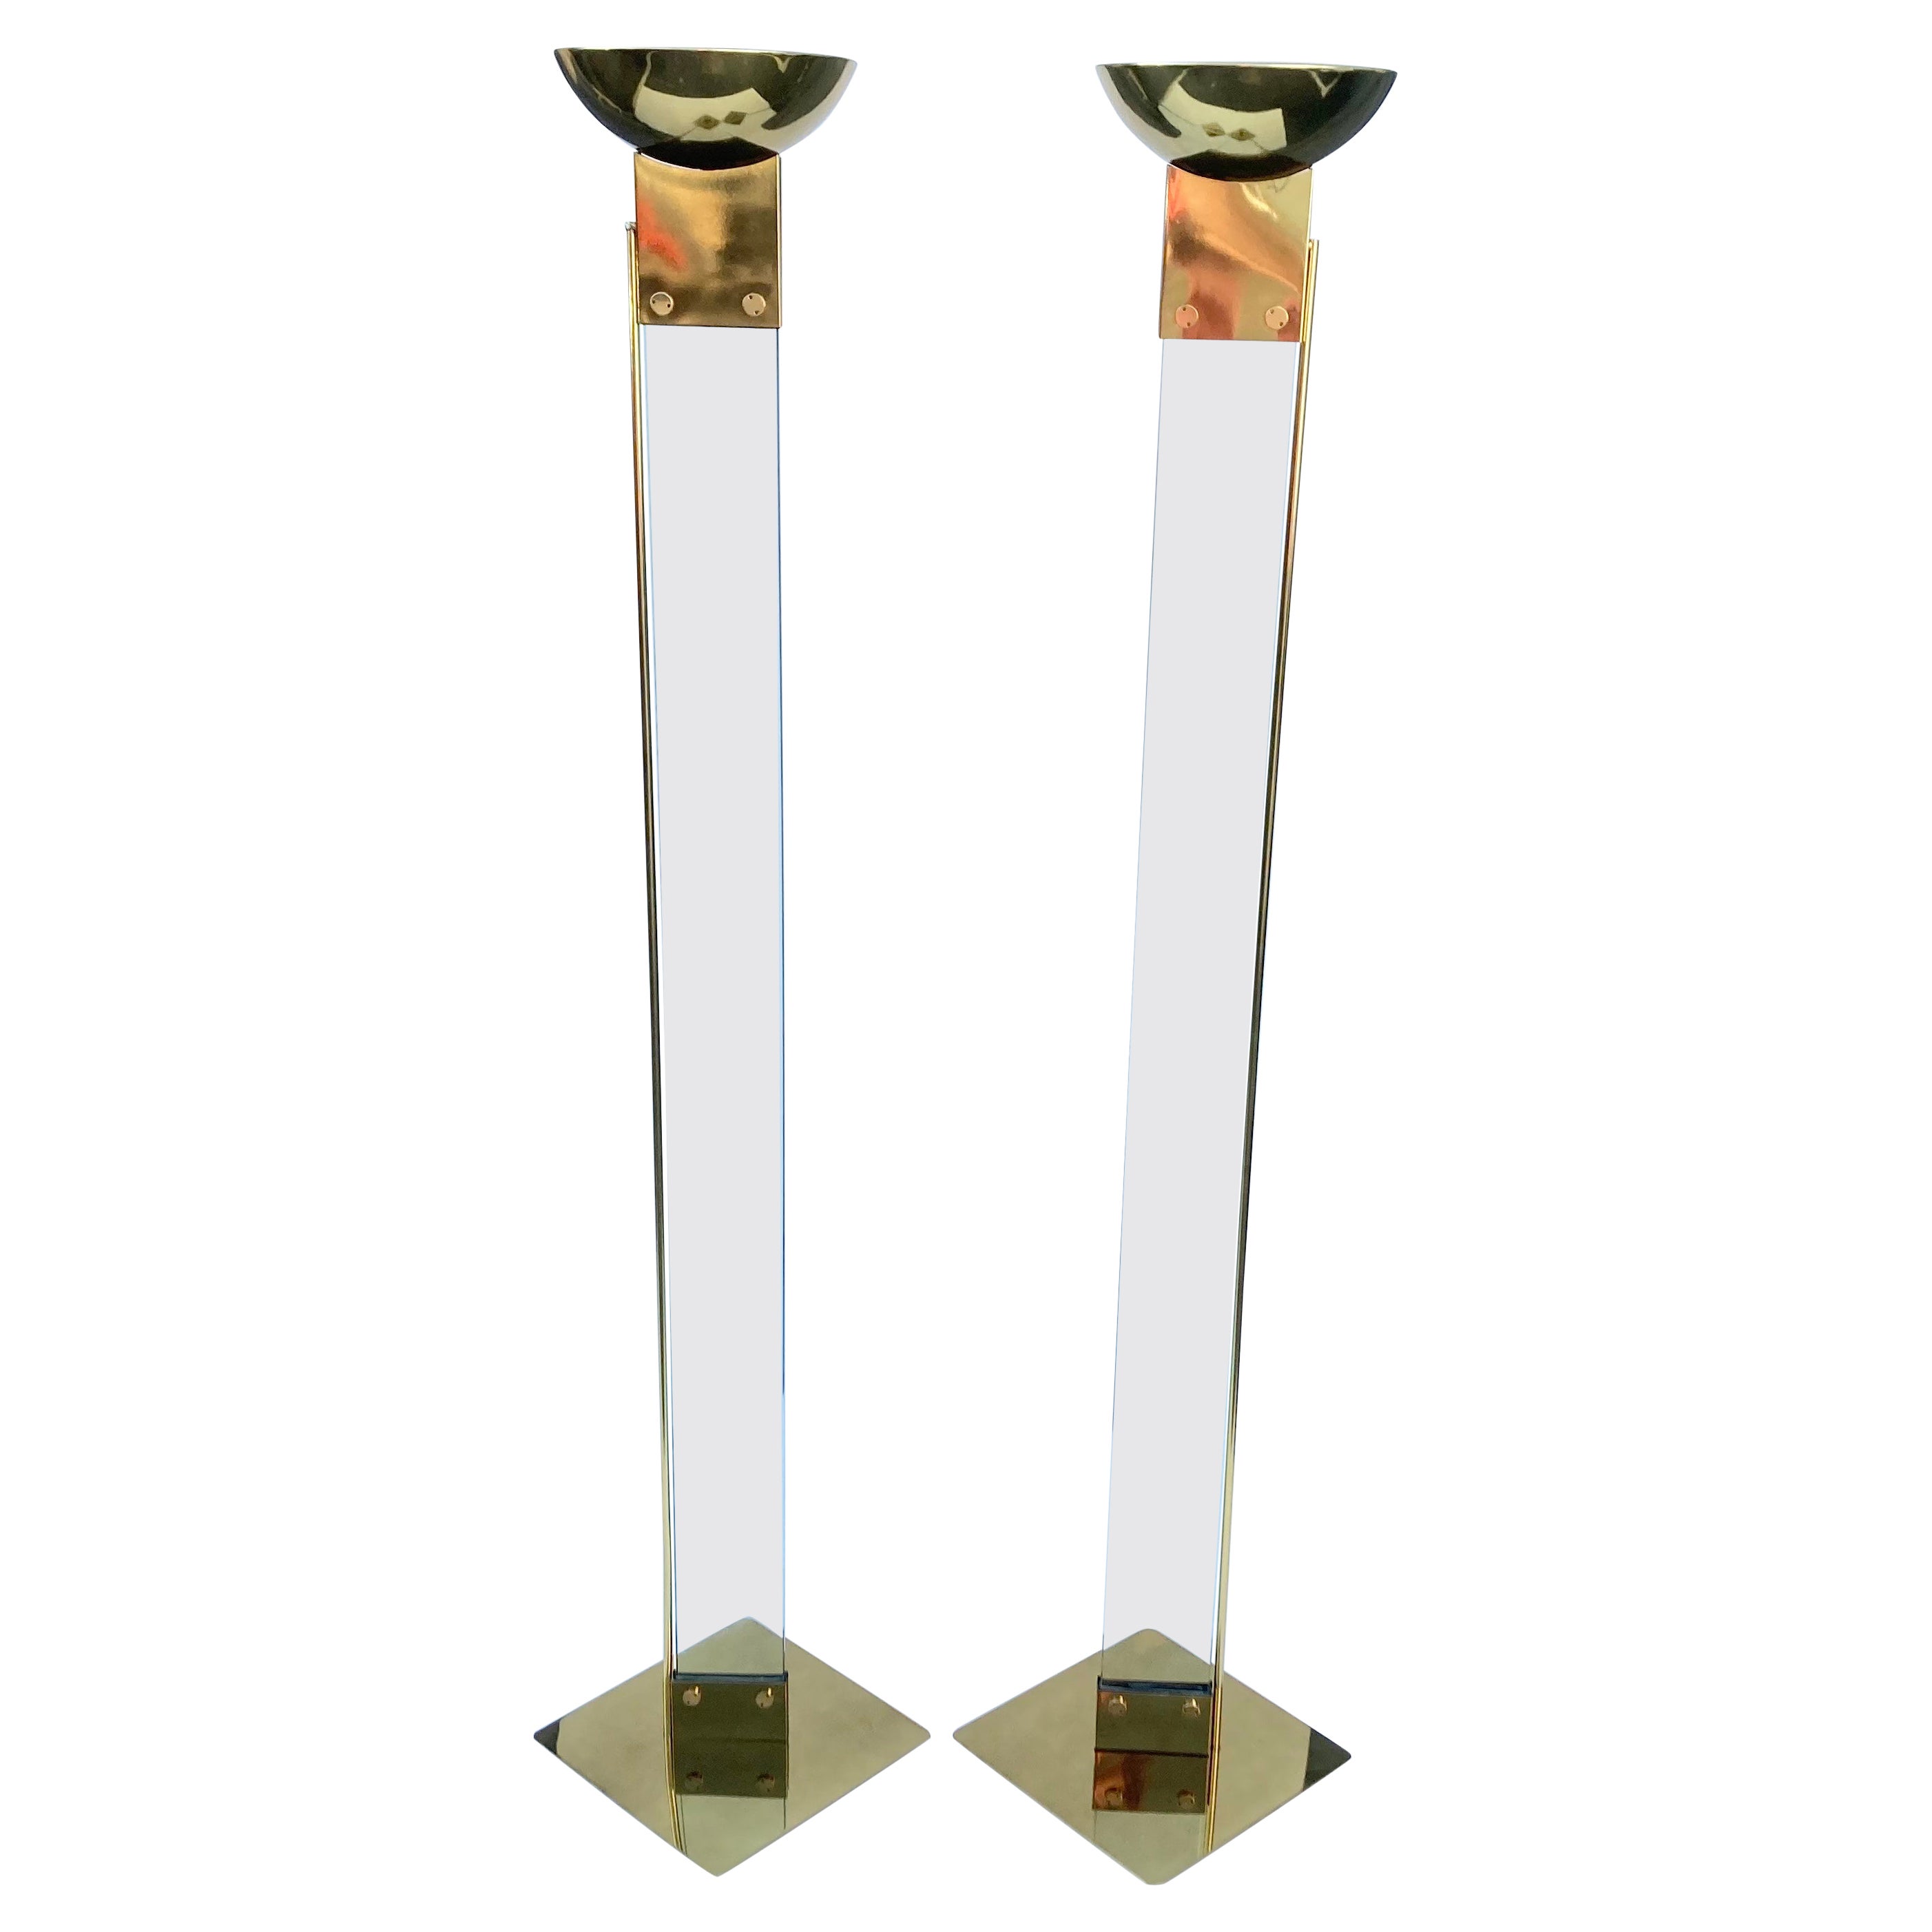 Pair of Italian Brass and Glass "Laser" Floor Lamp by Max Baguara for Lamperti For Sale